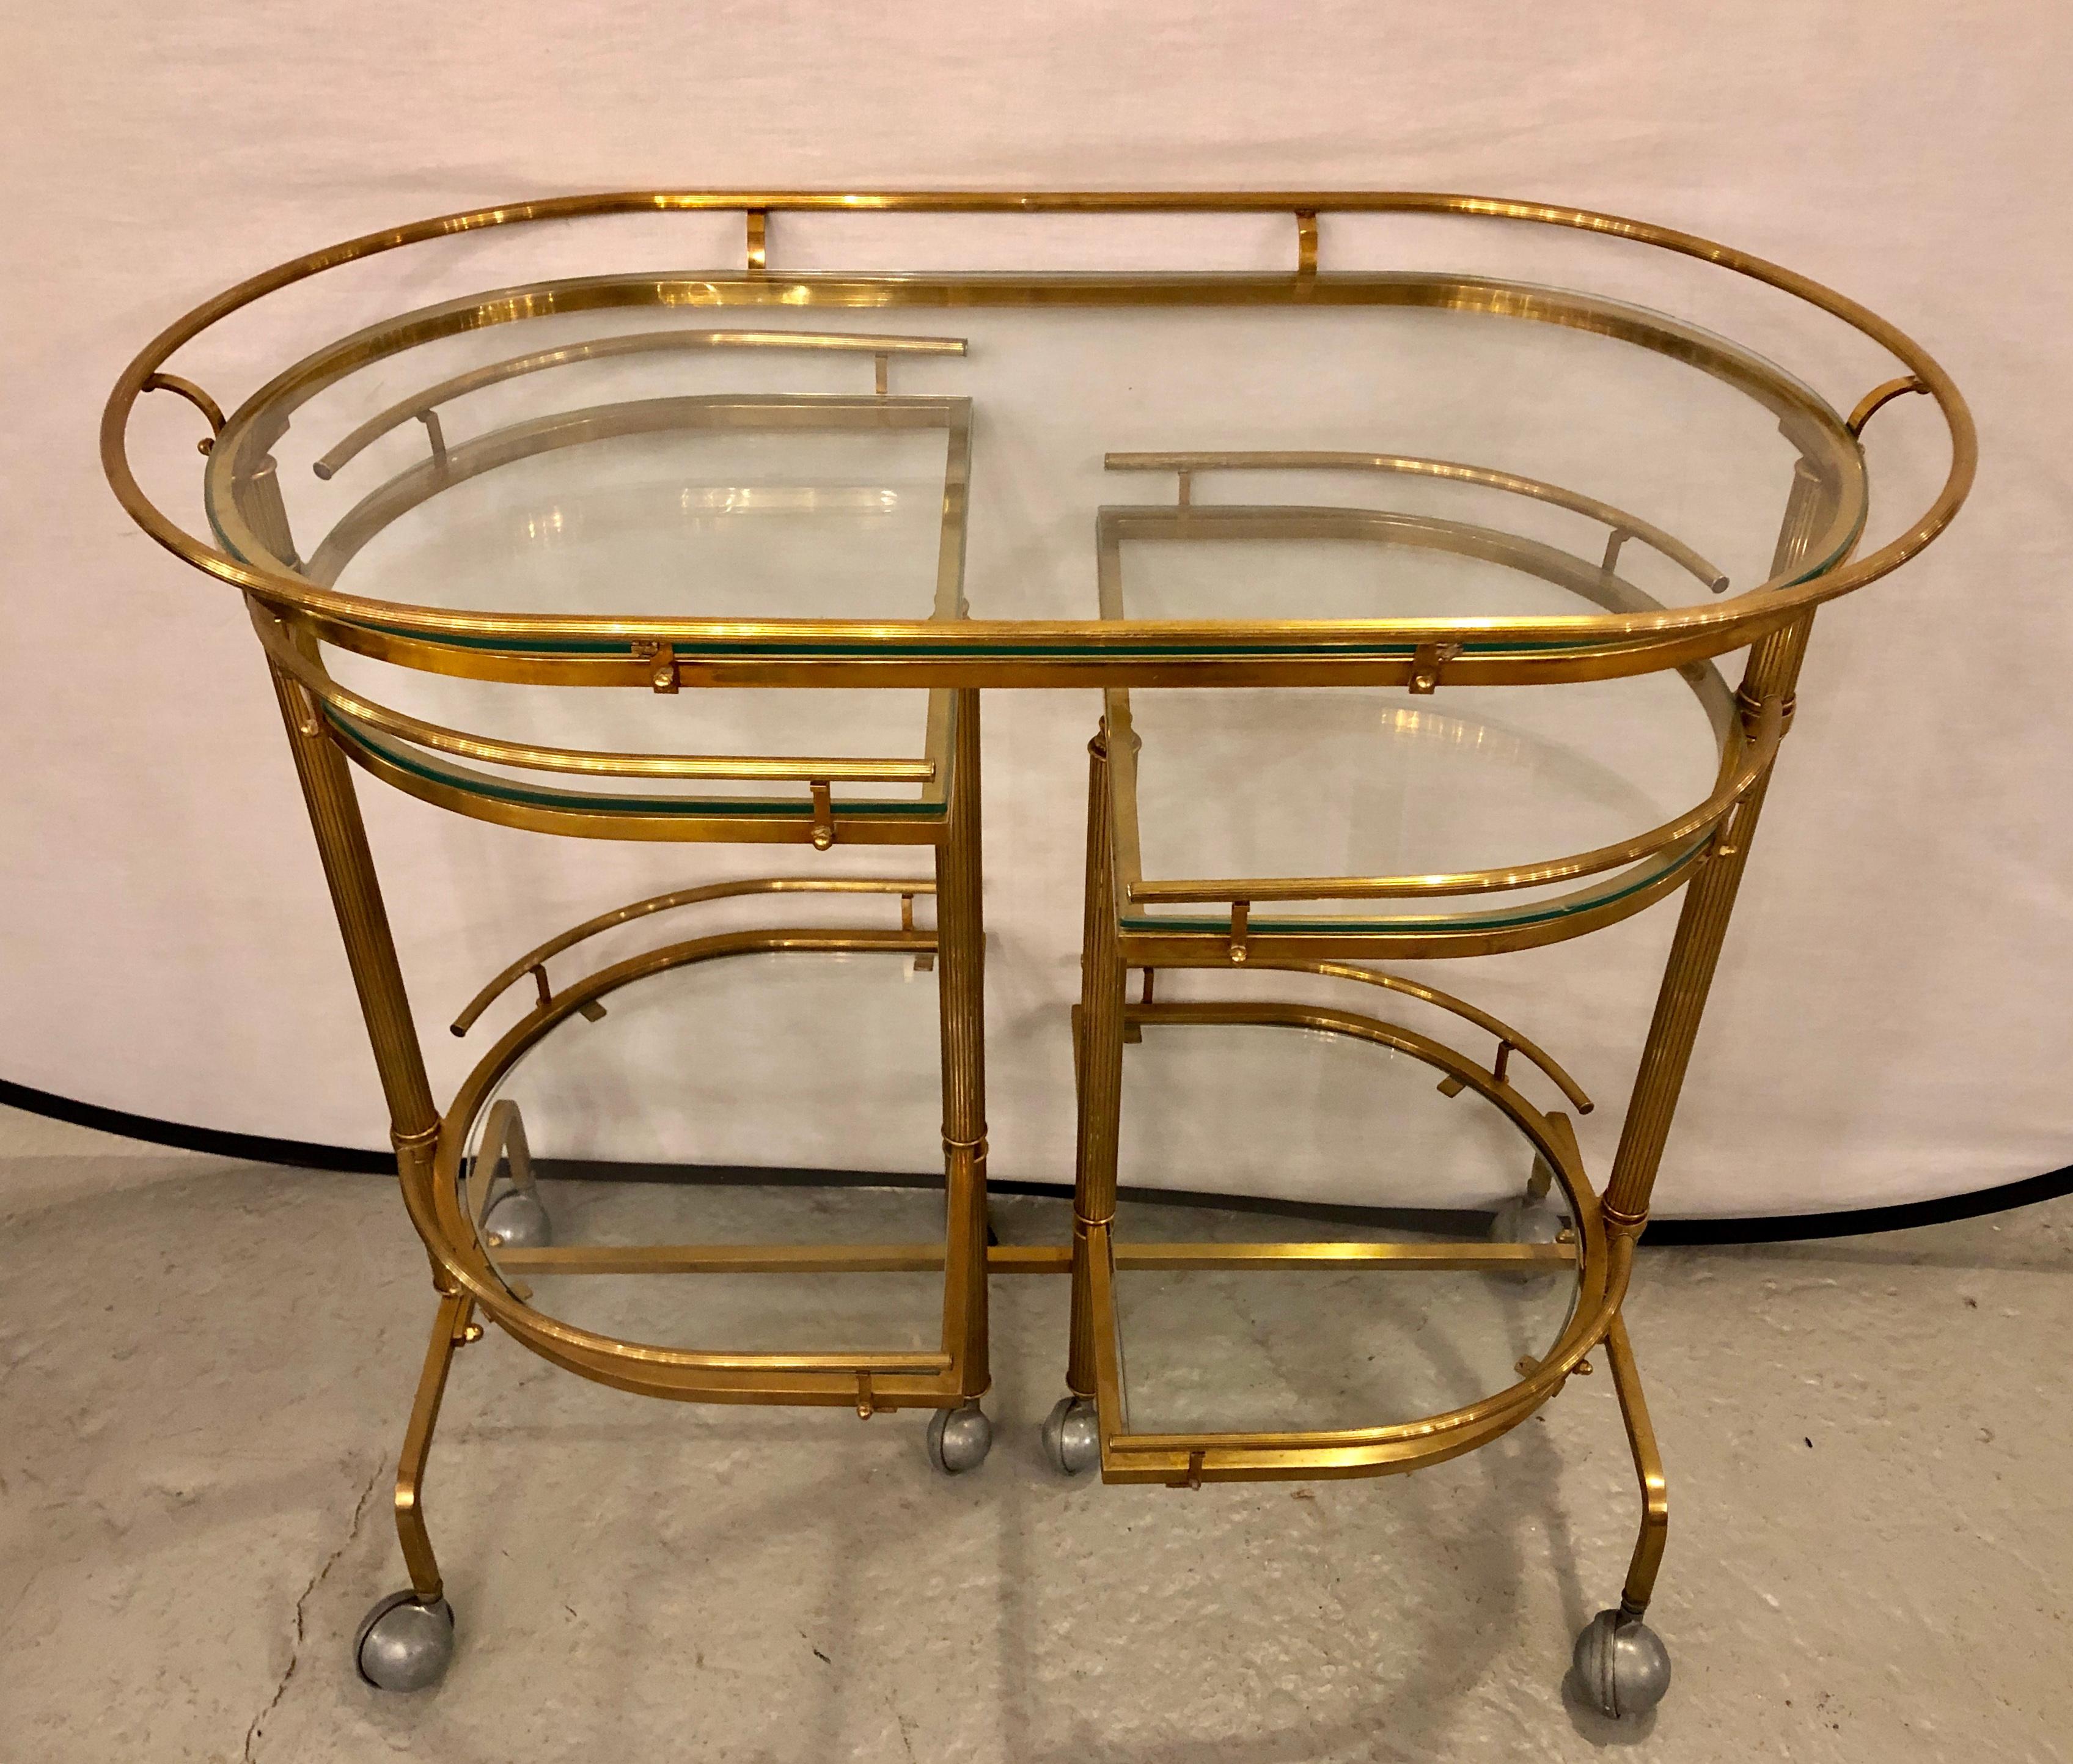 Hollywood Regency brass and glass swivel bar cart. This finely constructed rolling bar cart flows easily on it large casters with swing out side. The fully extended cart measures some 56 inches wide with a pair of lower and upper trays flanking a